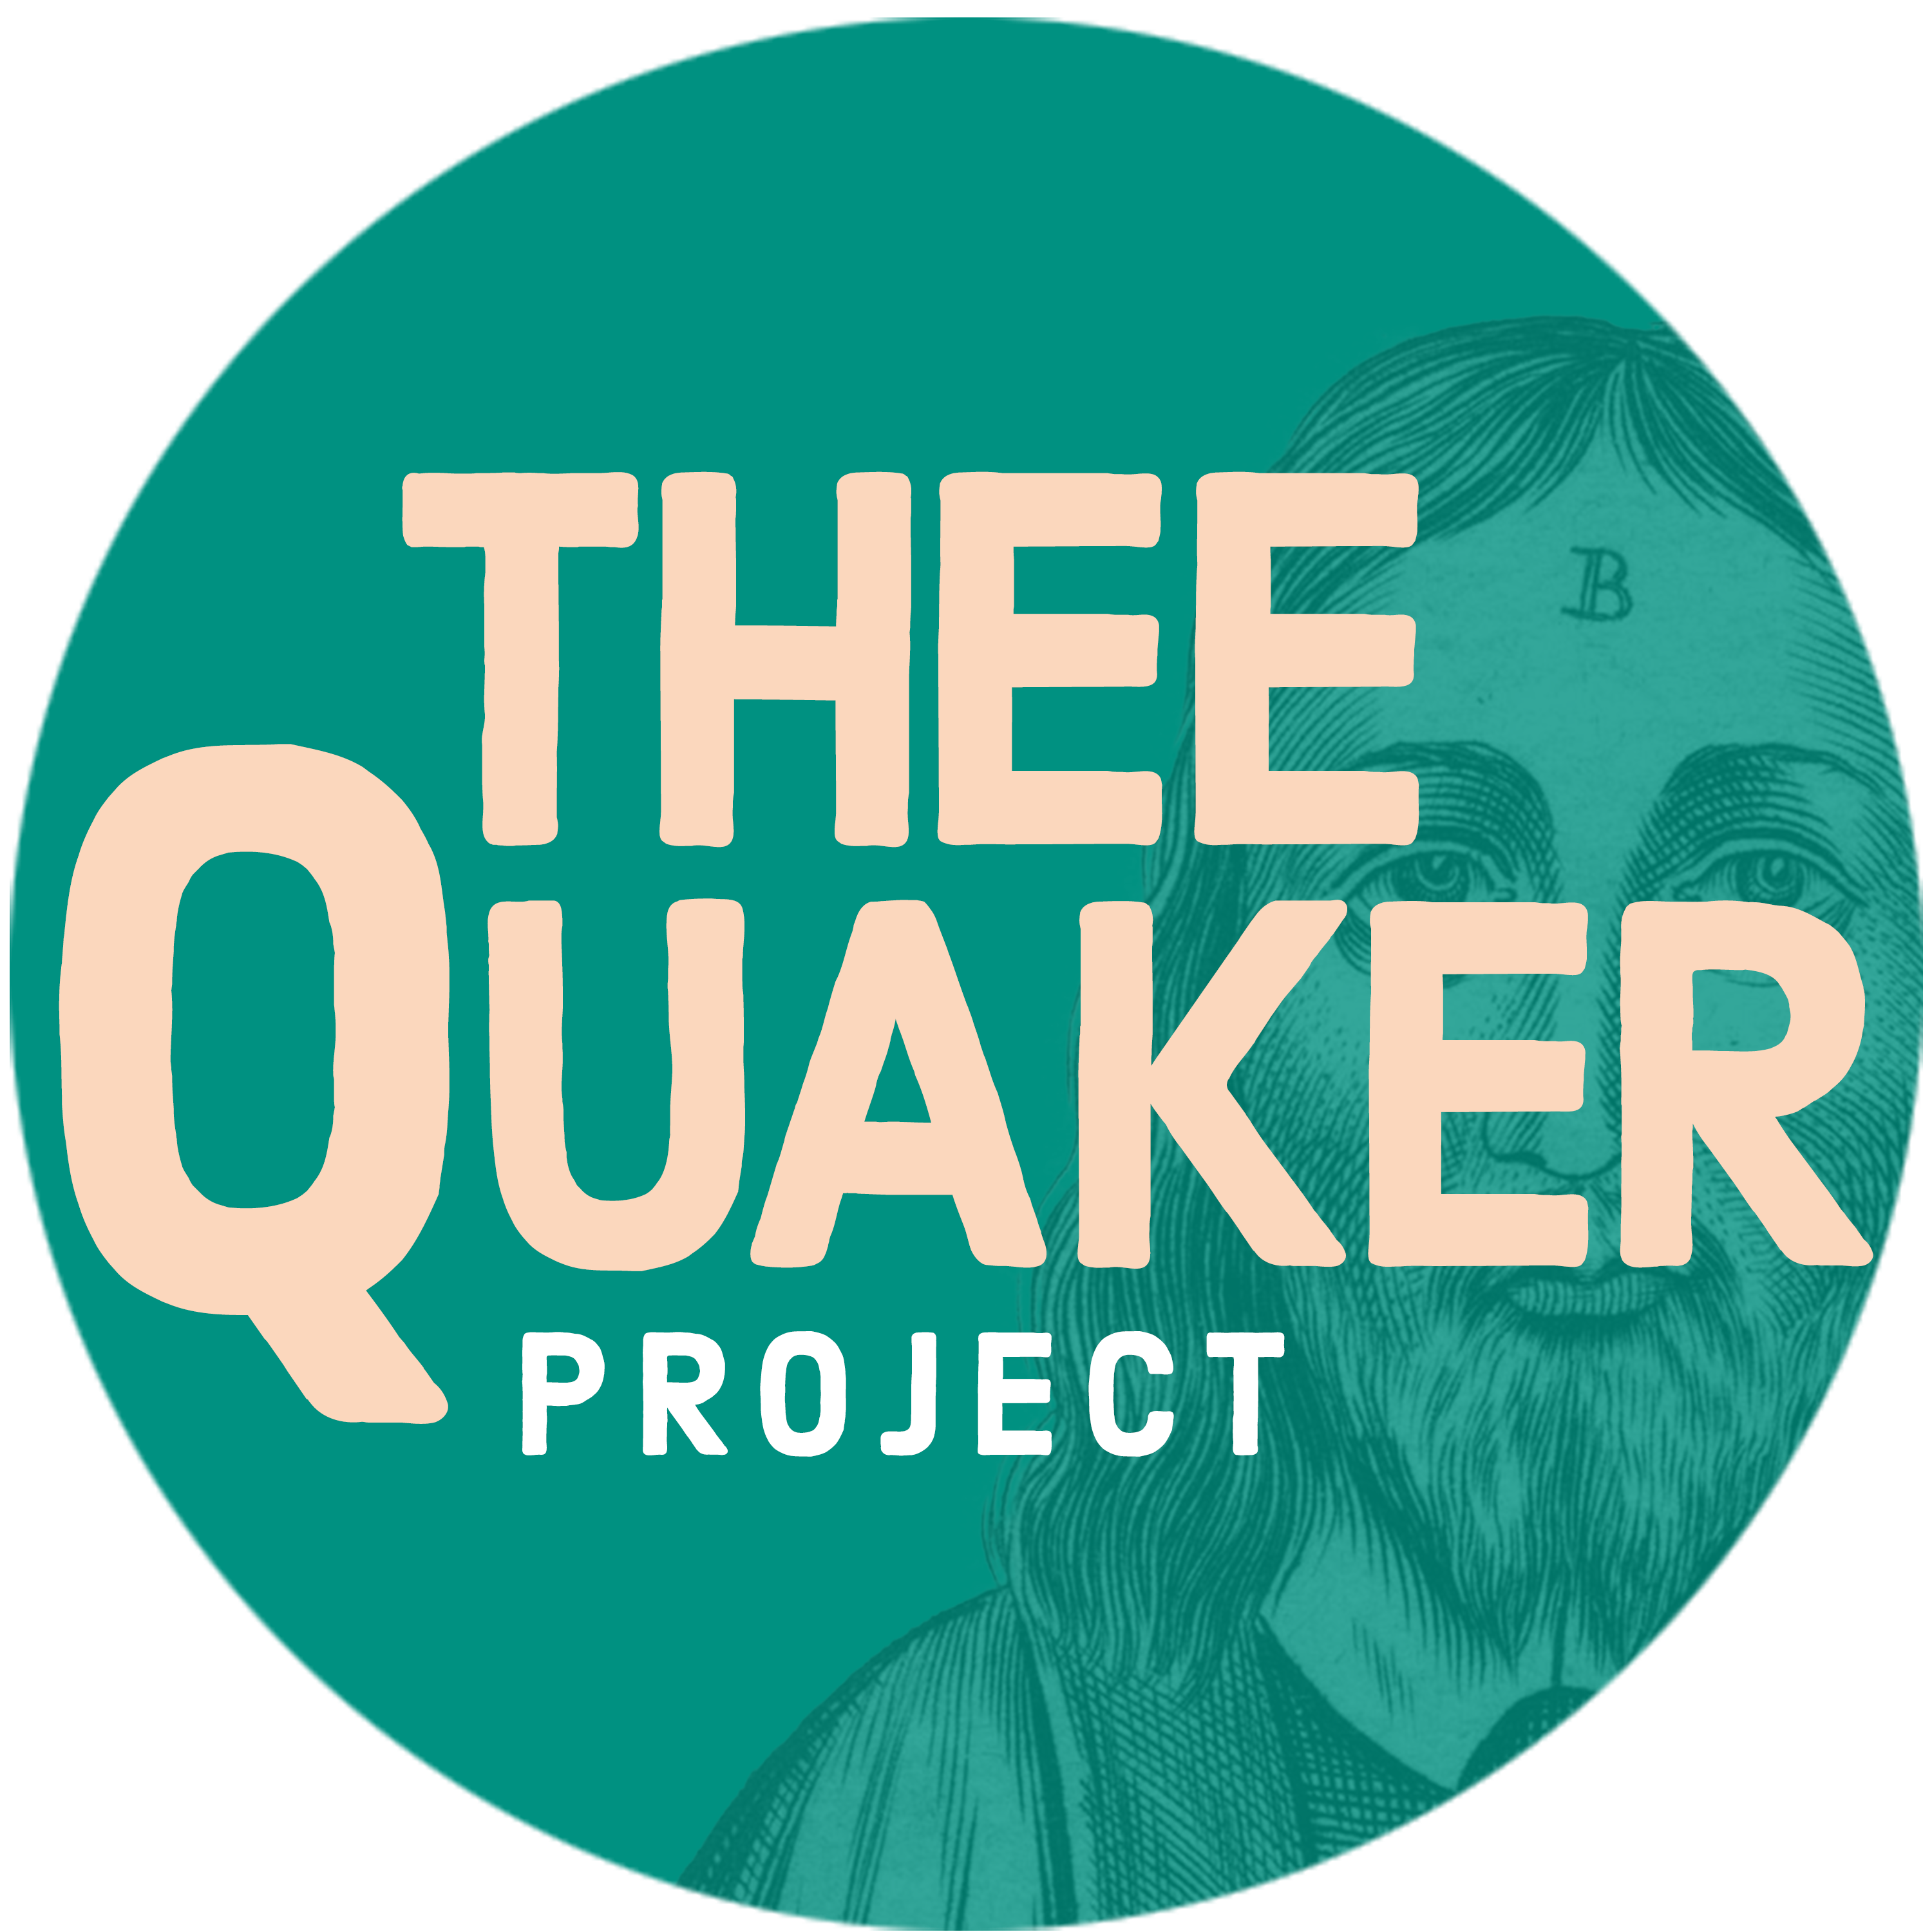 Thee Quaker Project is Awarded Shoemaker Grant